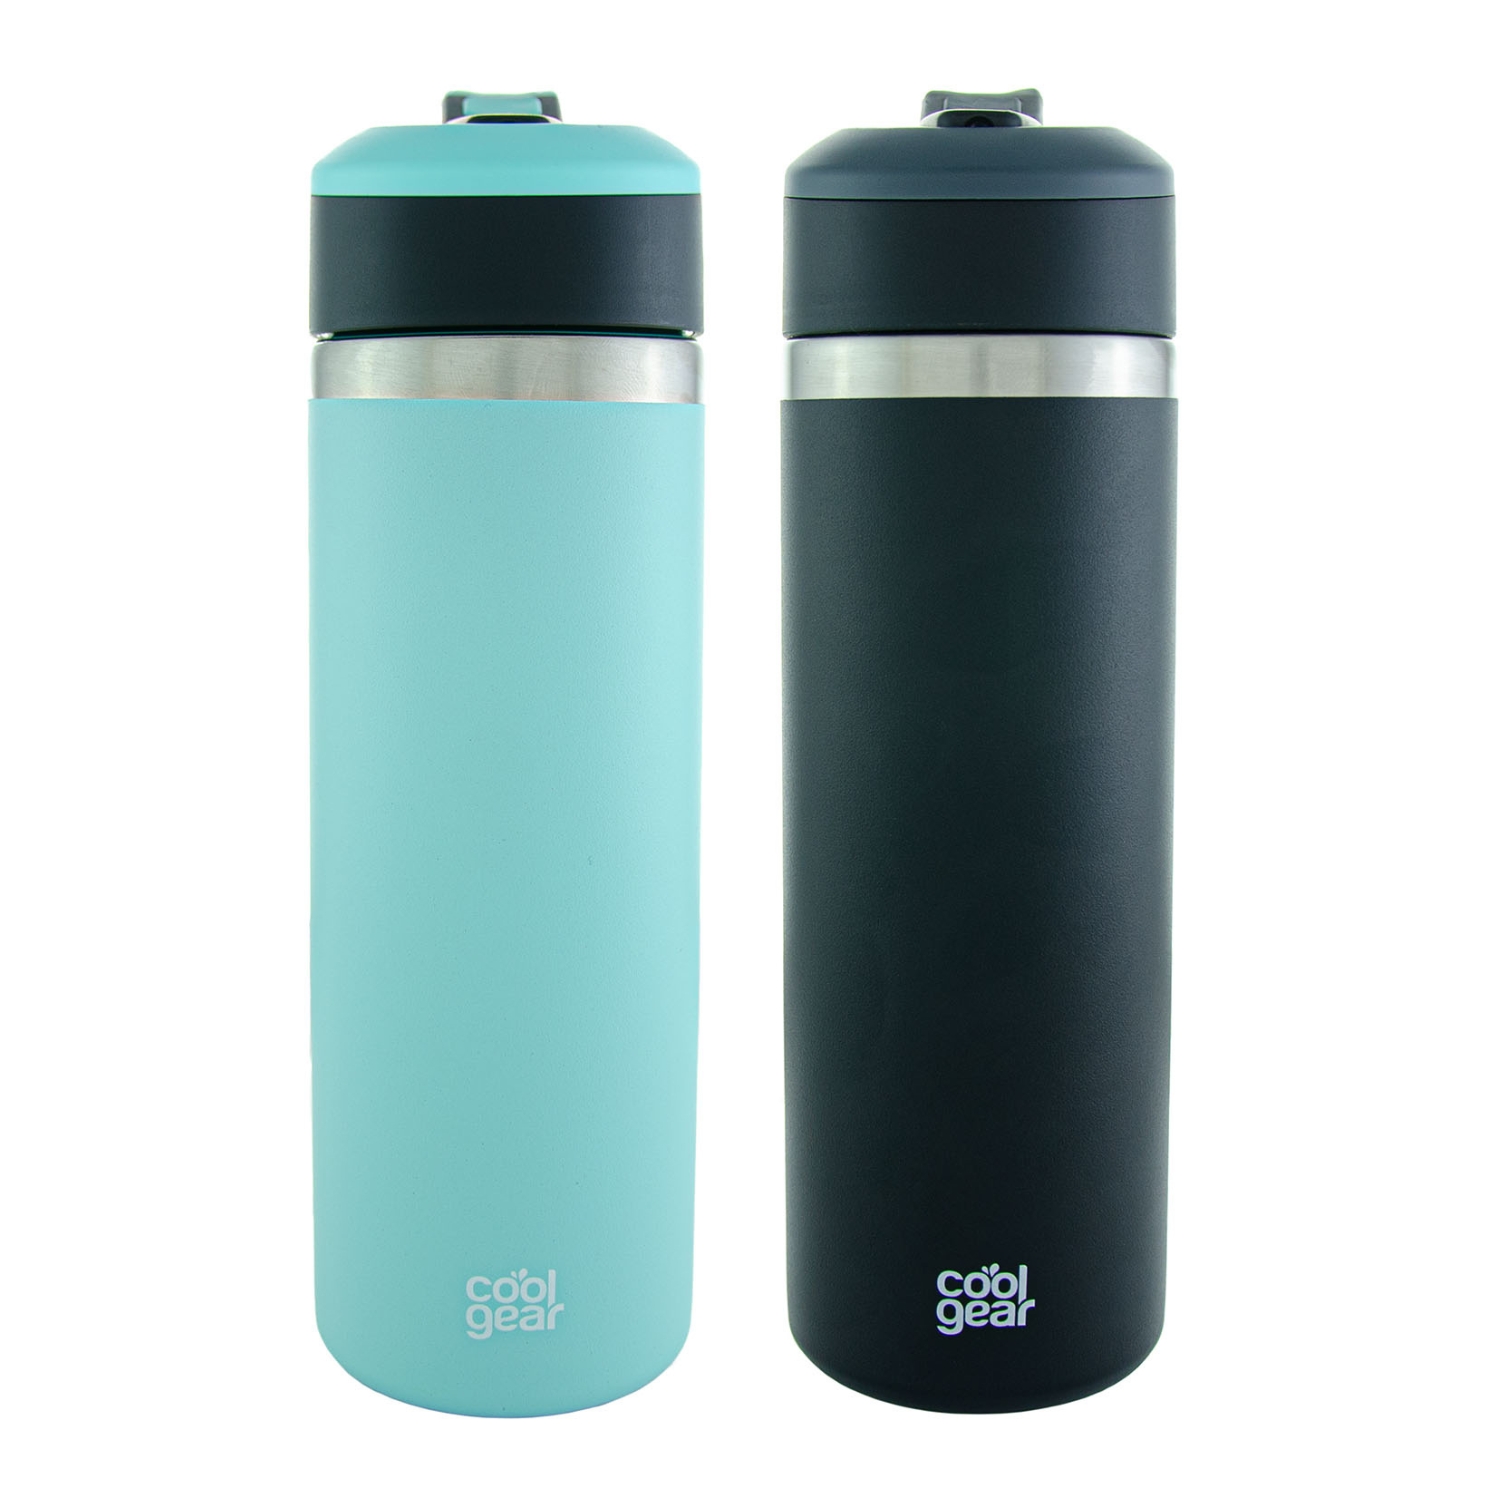 Thermoflask 32oz Insulated Standard Straw Tumbler, 2-Pack, Black/Teal Green